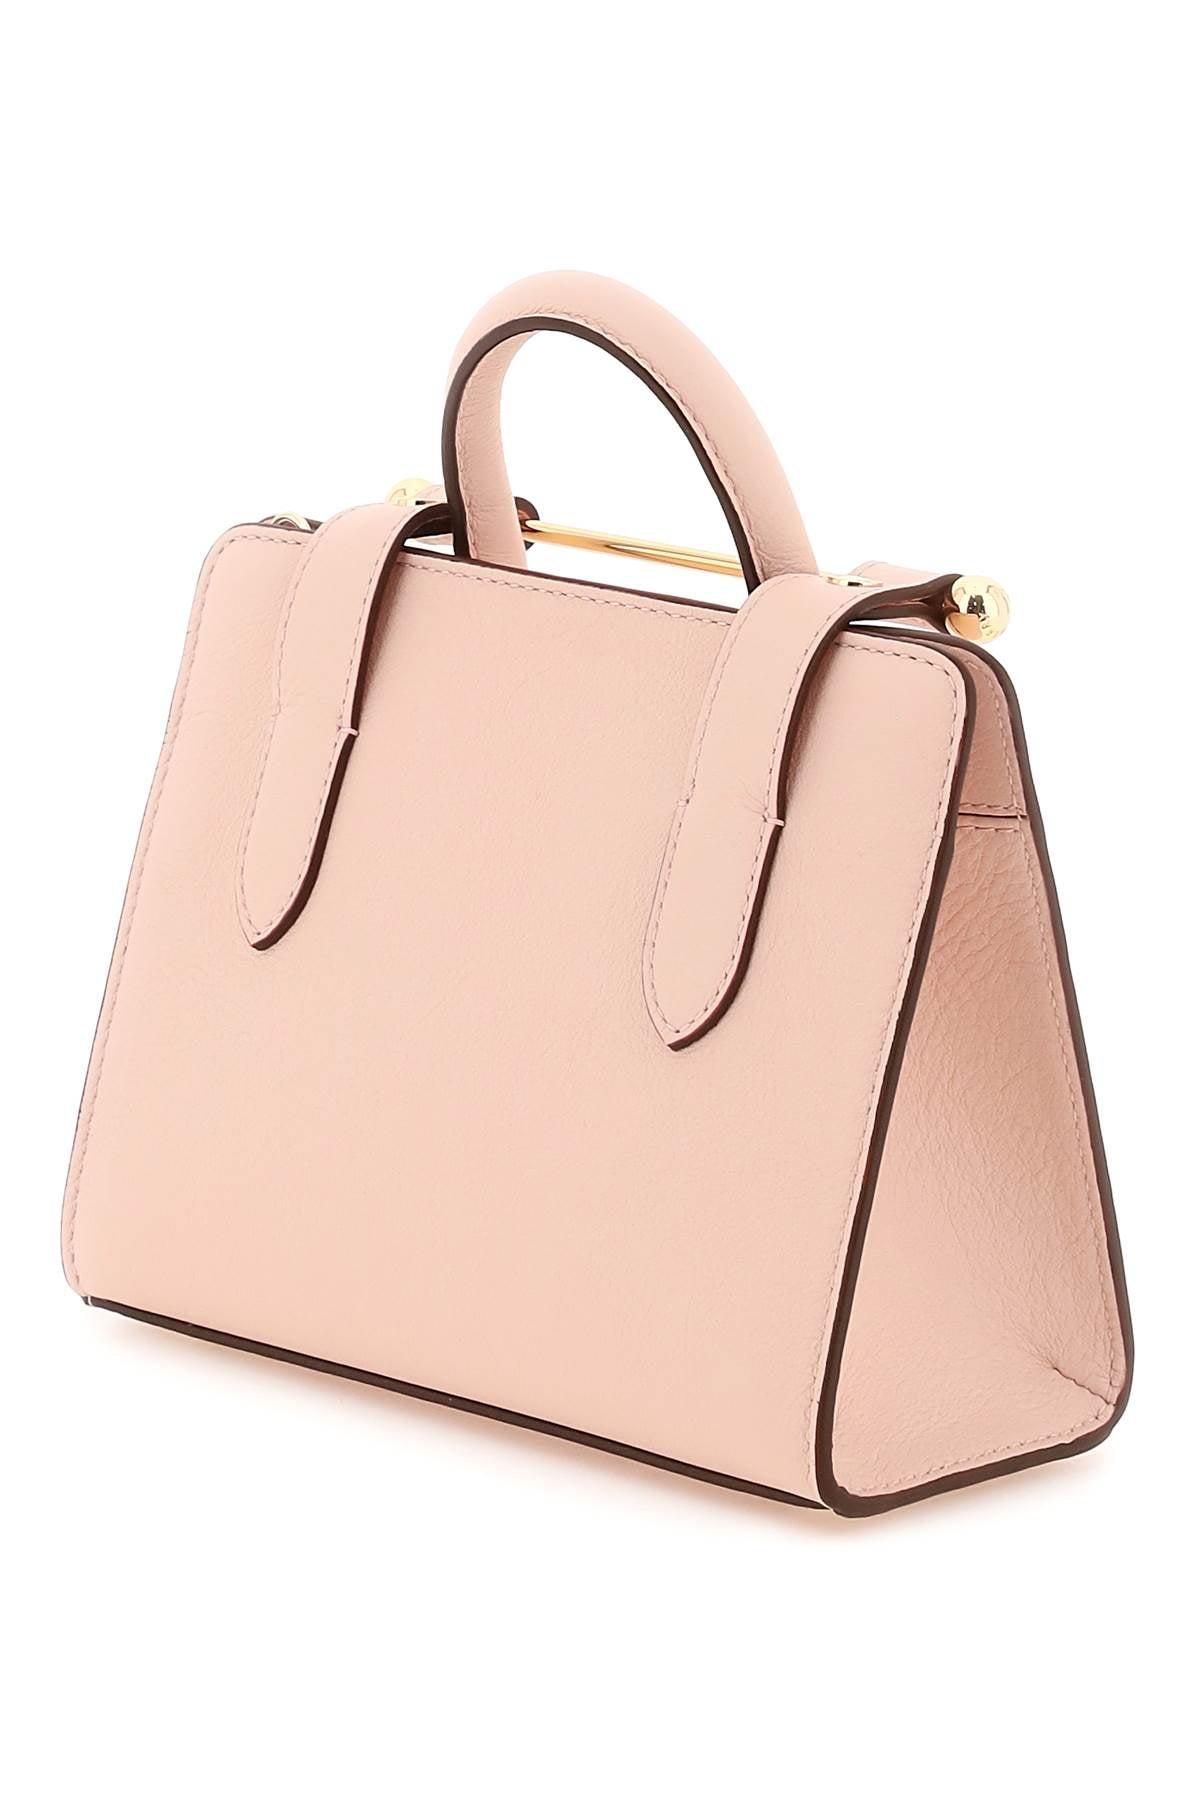 Strathberry 'nano Tote' Leather Bag in Pink | Lyst